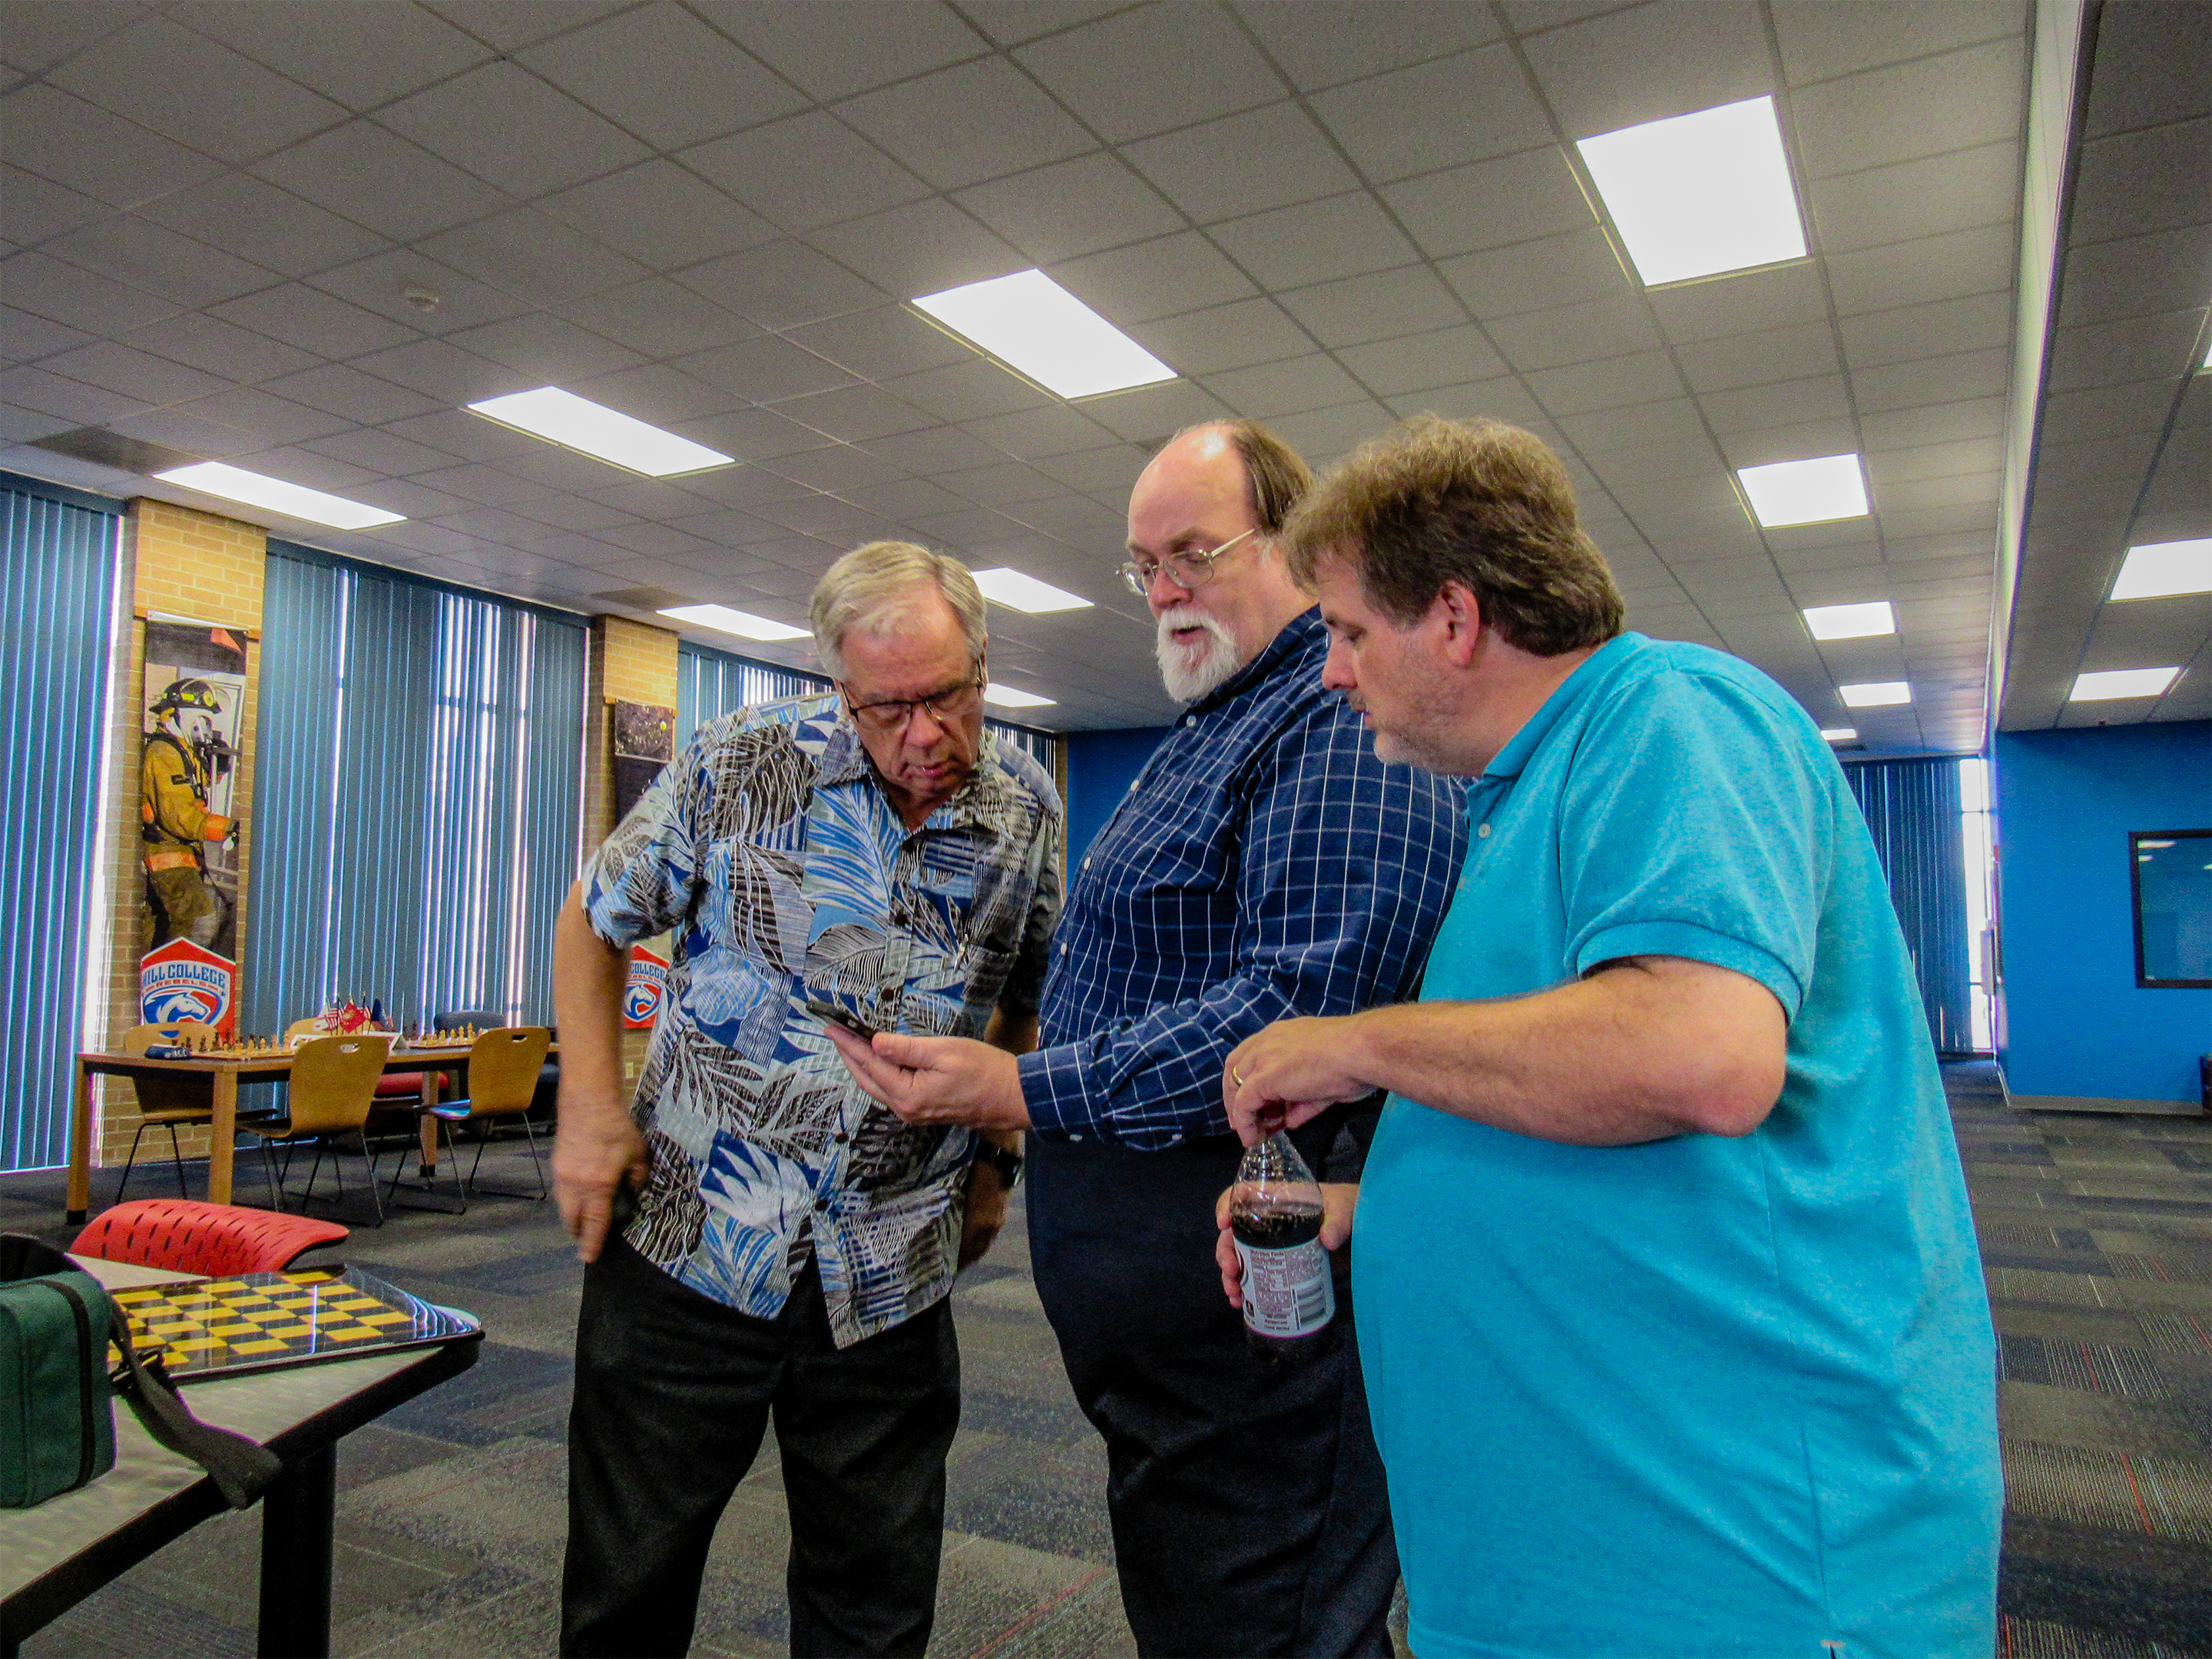 During Friday afternoon's set-up Adjutant Dale Chaney, Library Director Joe Shaughnessy, Chief Tournament Director Chris Wood paused to look at a new chess app on a phone.  Photo by Jim Hollingsworth.